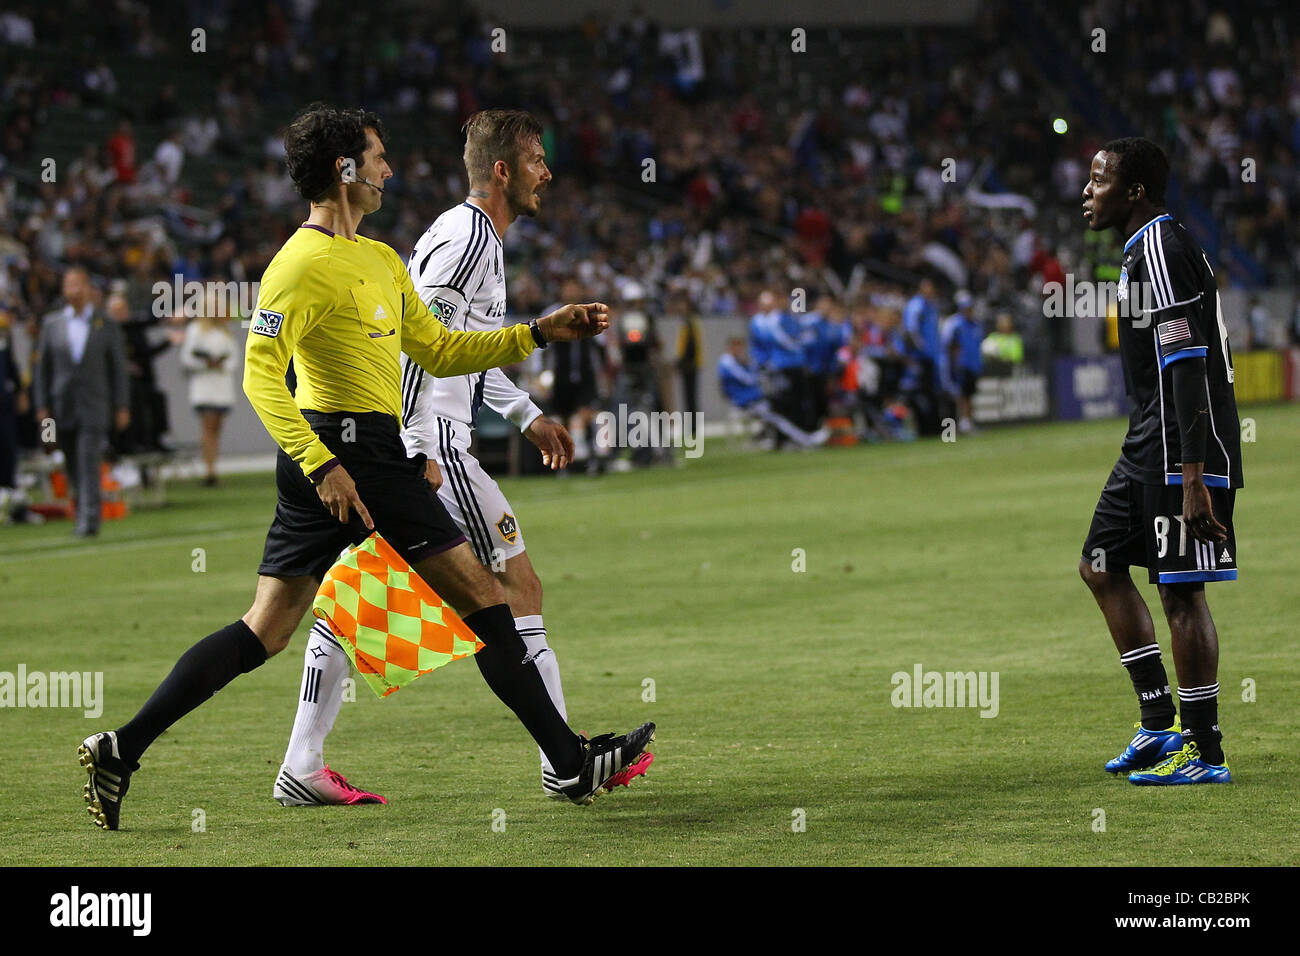 May 23, 2012 - Carson, California, United States of America - The referee rushes in to break up a fight between David Beckham (23) of Los Angeles Galaxy and Marvin Chavez (81) of San Jose Earthquakes in the second half during the Los Angeles Galaxy vs San Jose Earthquakes game at the Home Depot Cent Stock Photo